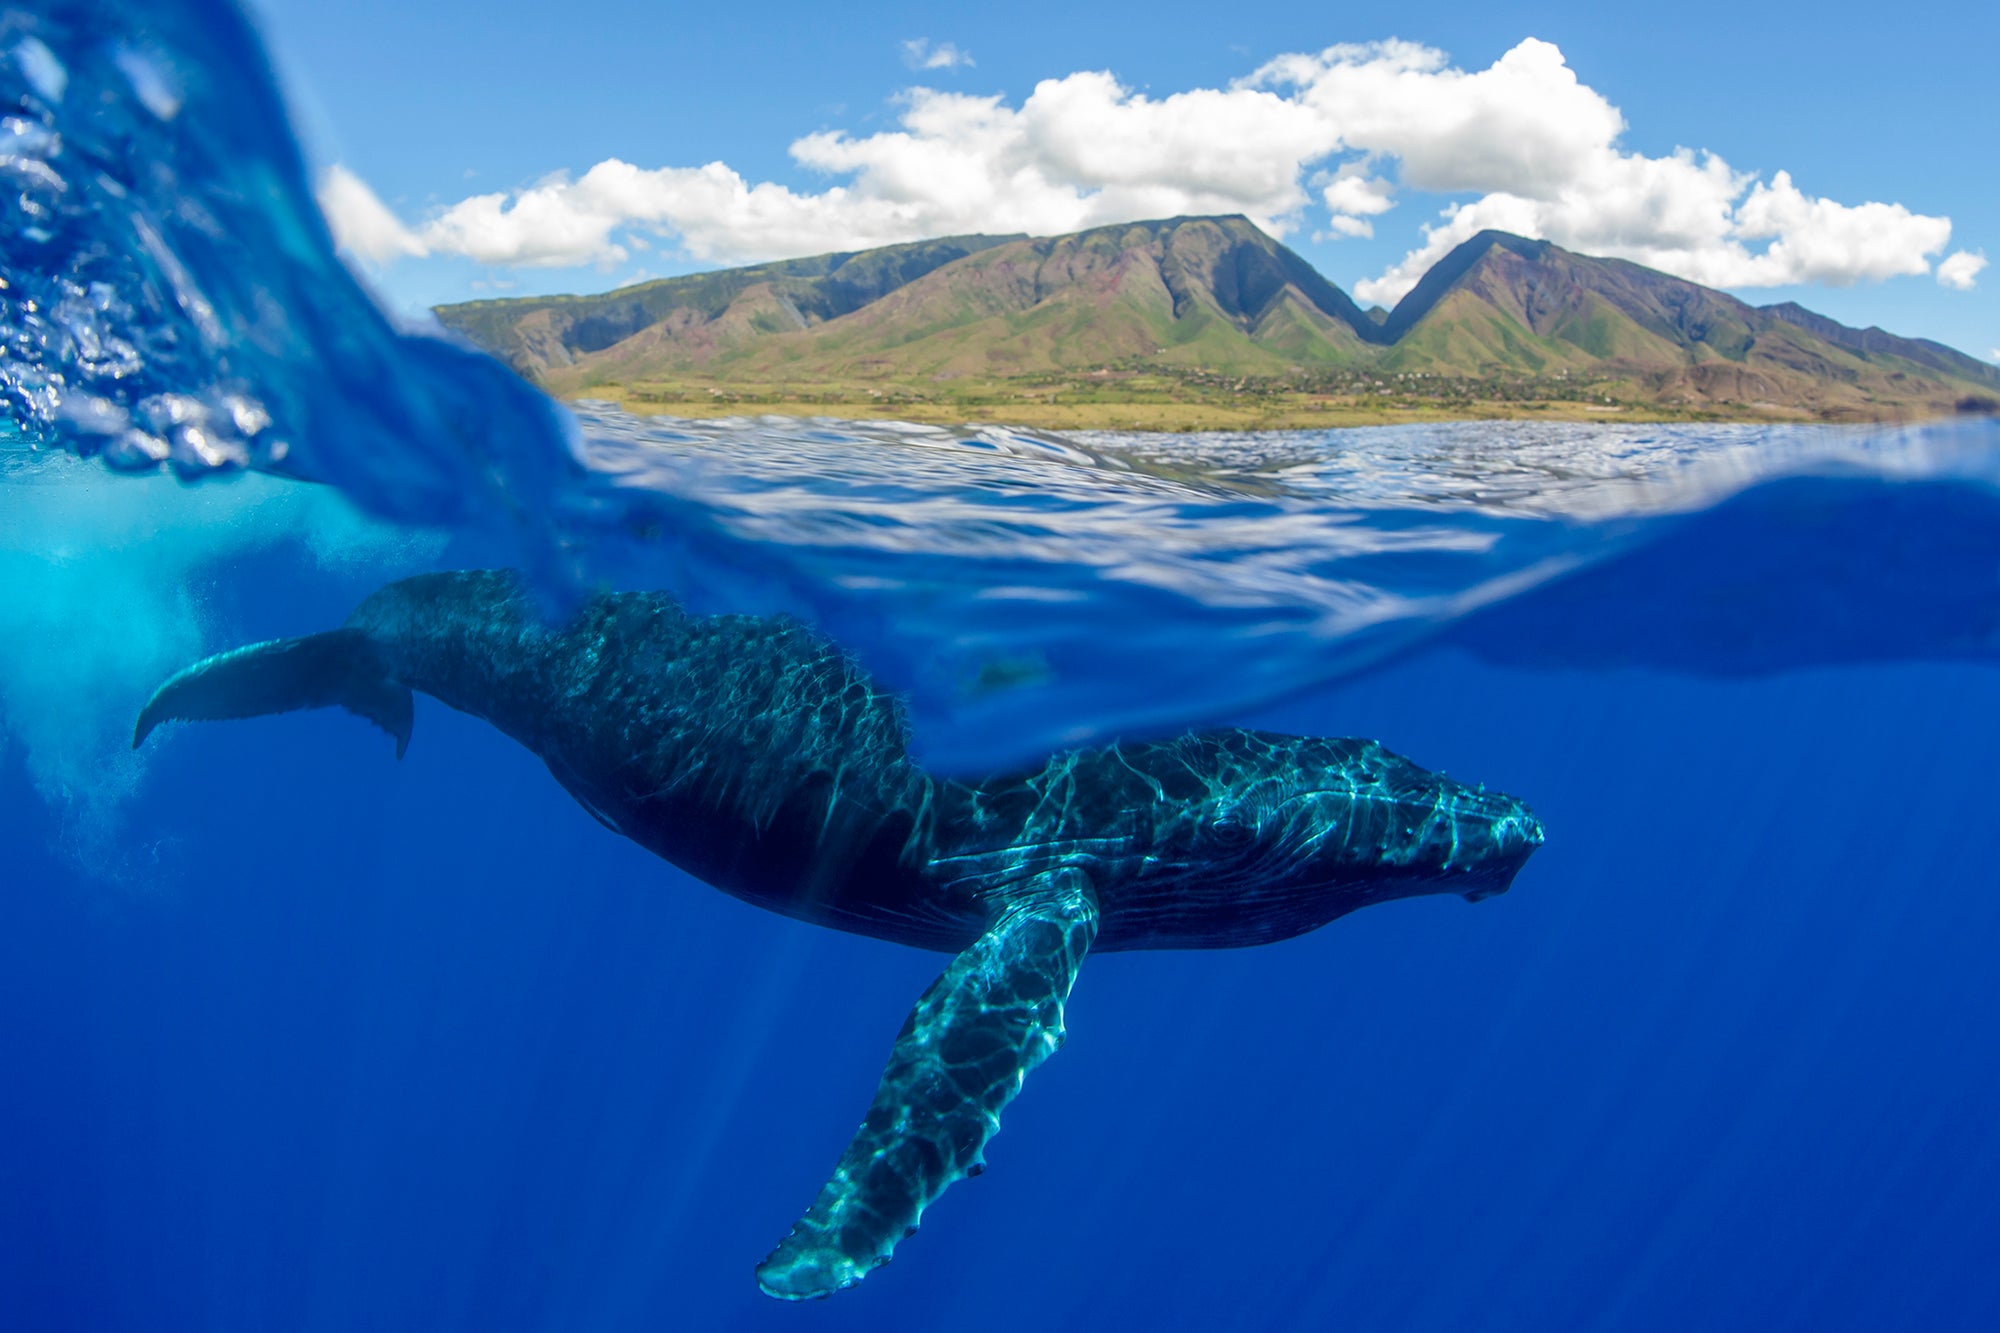 An Over/Under image of a Humback Whale Calf playing at the surface with the West Maui Mountains in the background. This images was taken while doing research with the Kieki Kohola Project on Maui.